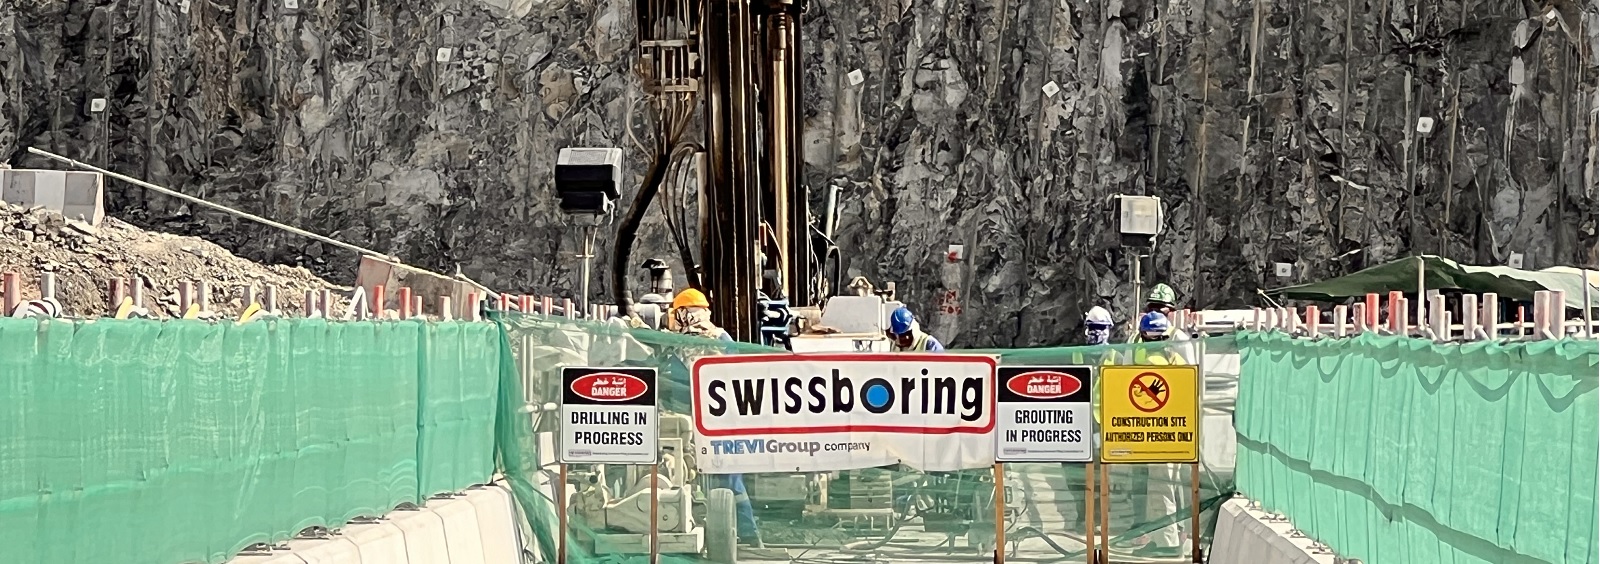 Swissboring involved in the Pumped Storage Hydro Power Plant project at Hattath Treviiicos